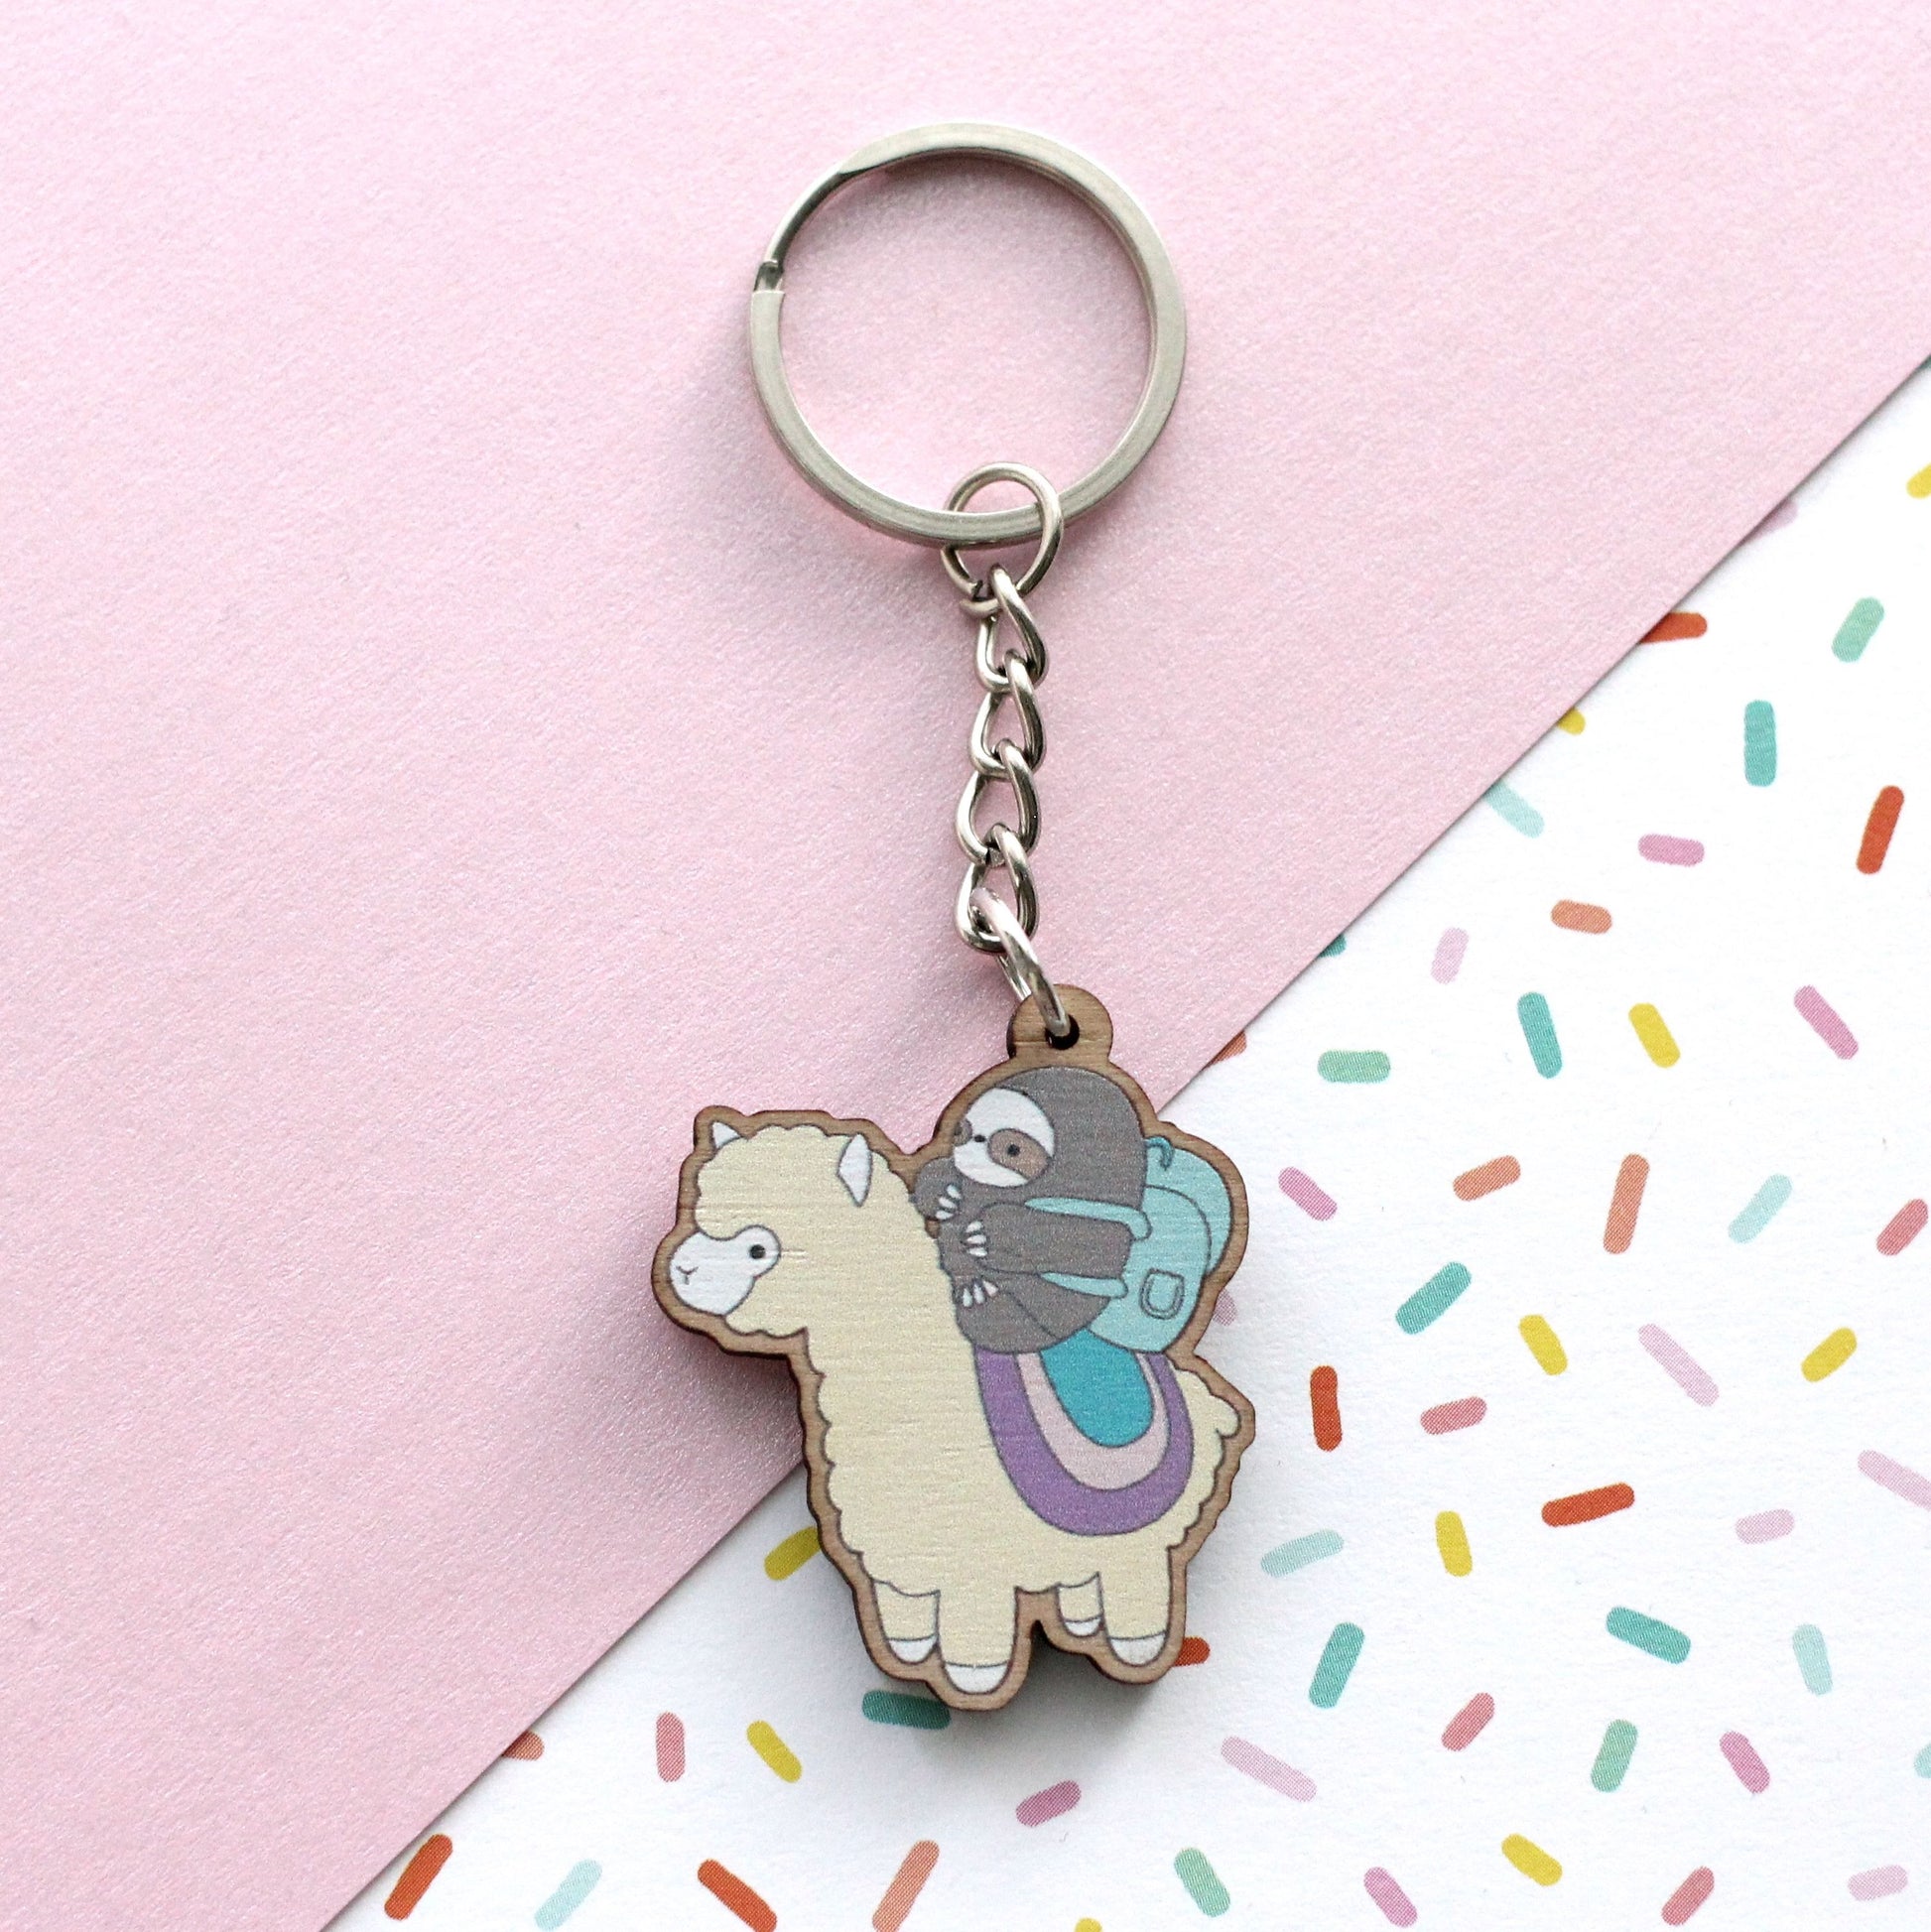 Sloth and Alpaca Adventurer Wooden Keychain (Light) - Sustainable Gift - Llama Gift by Wild Whimsy Woolies